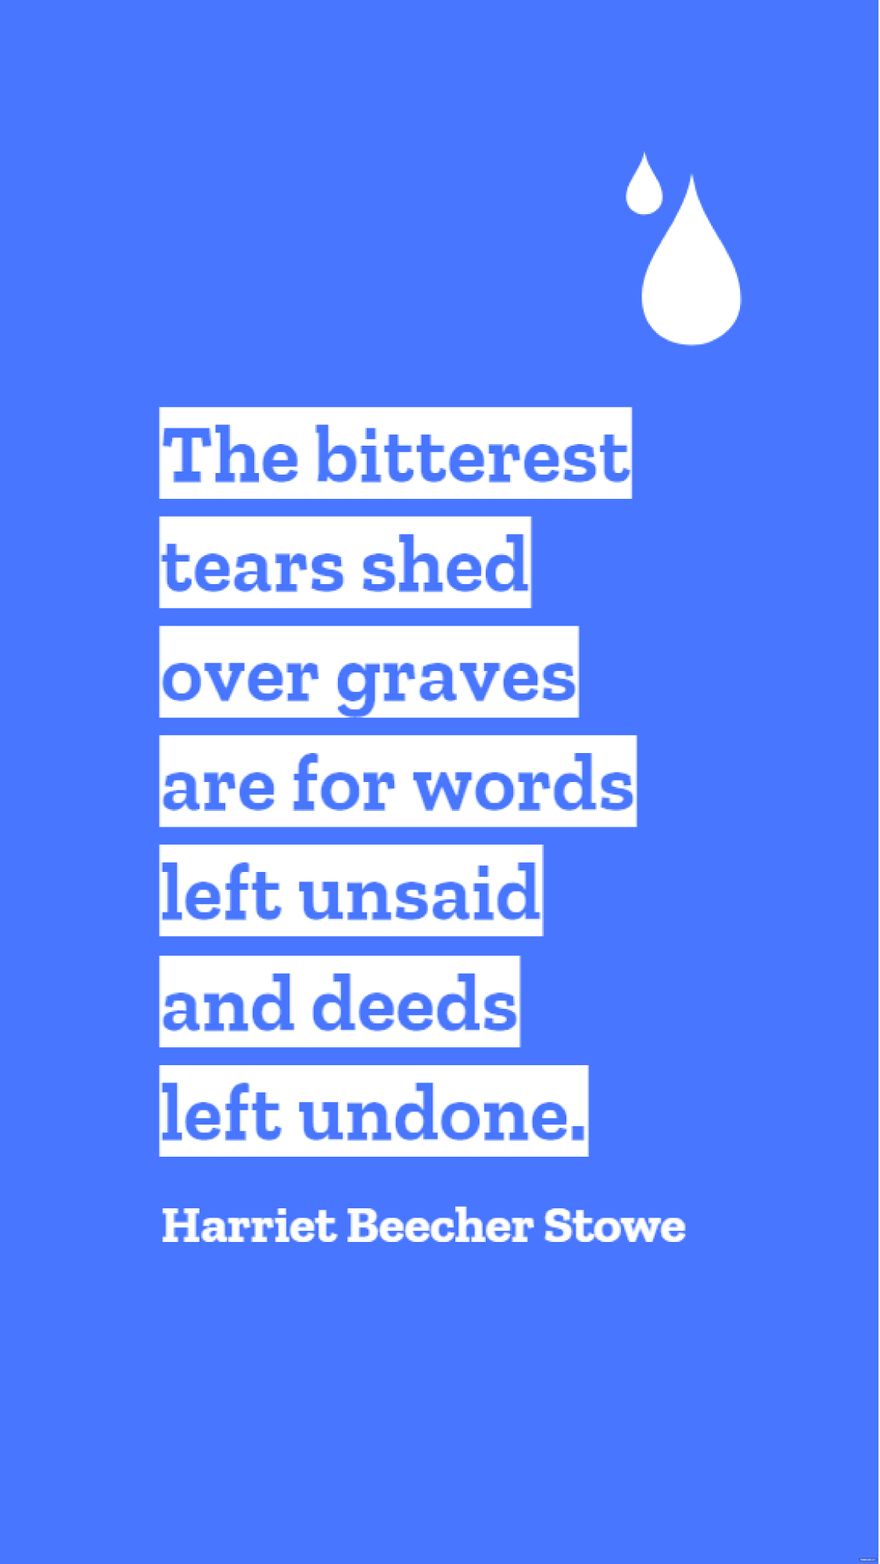 Harriet Beecher Stowe - The bitterest tears shed over graves are for words left unsaid and deeds left undone.